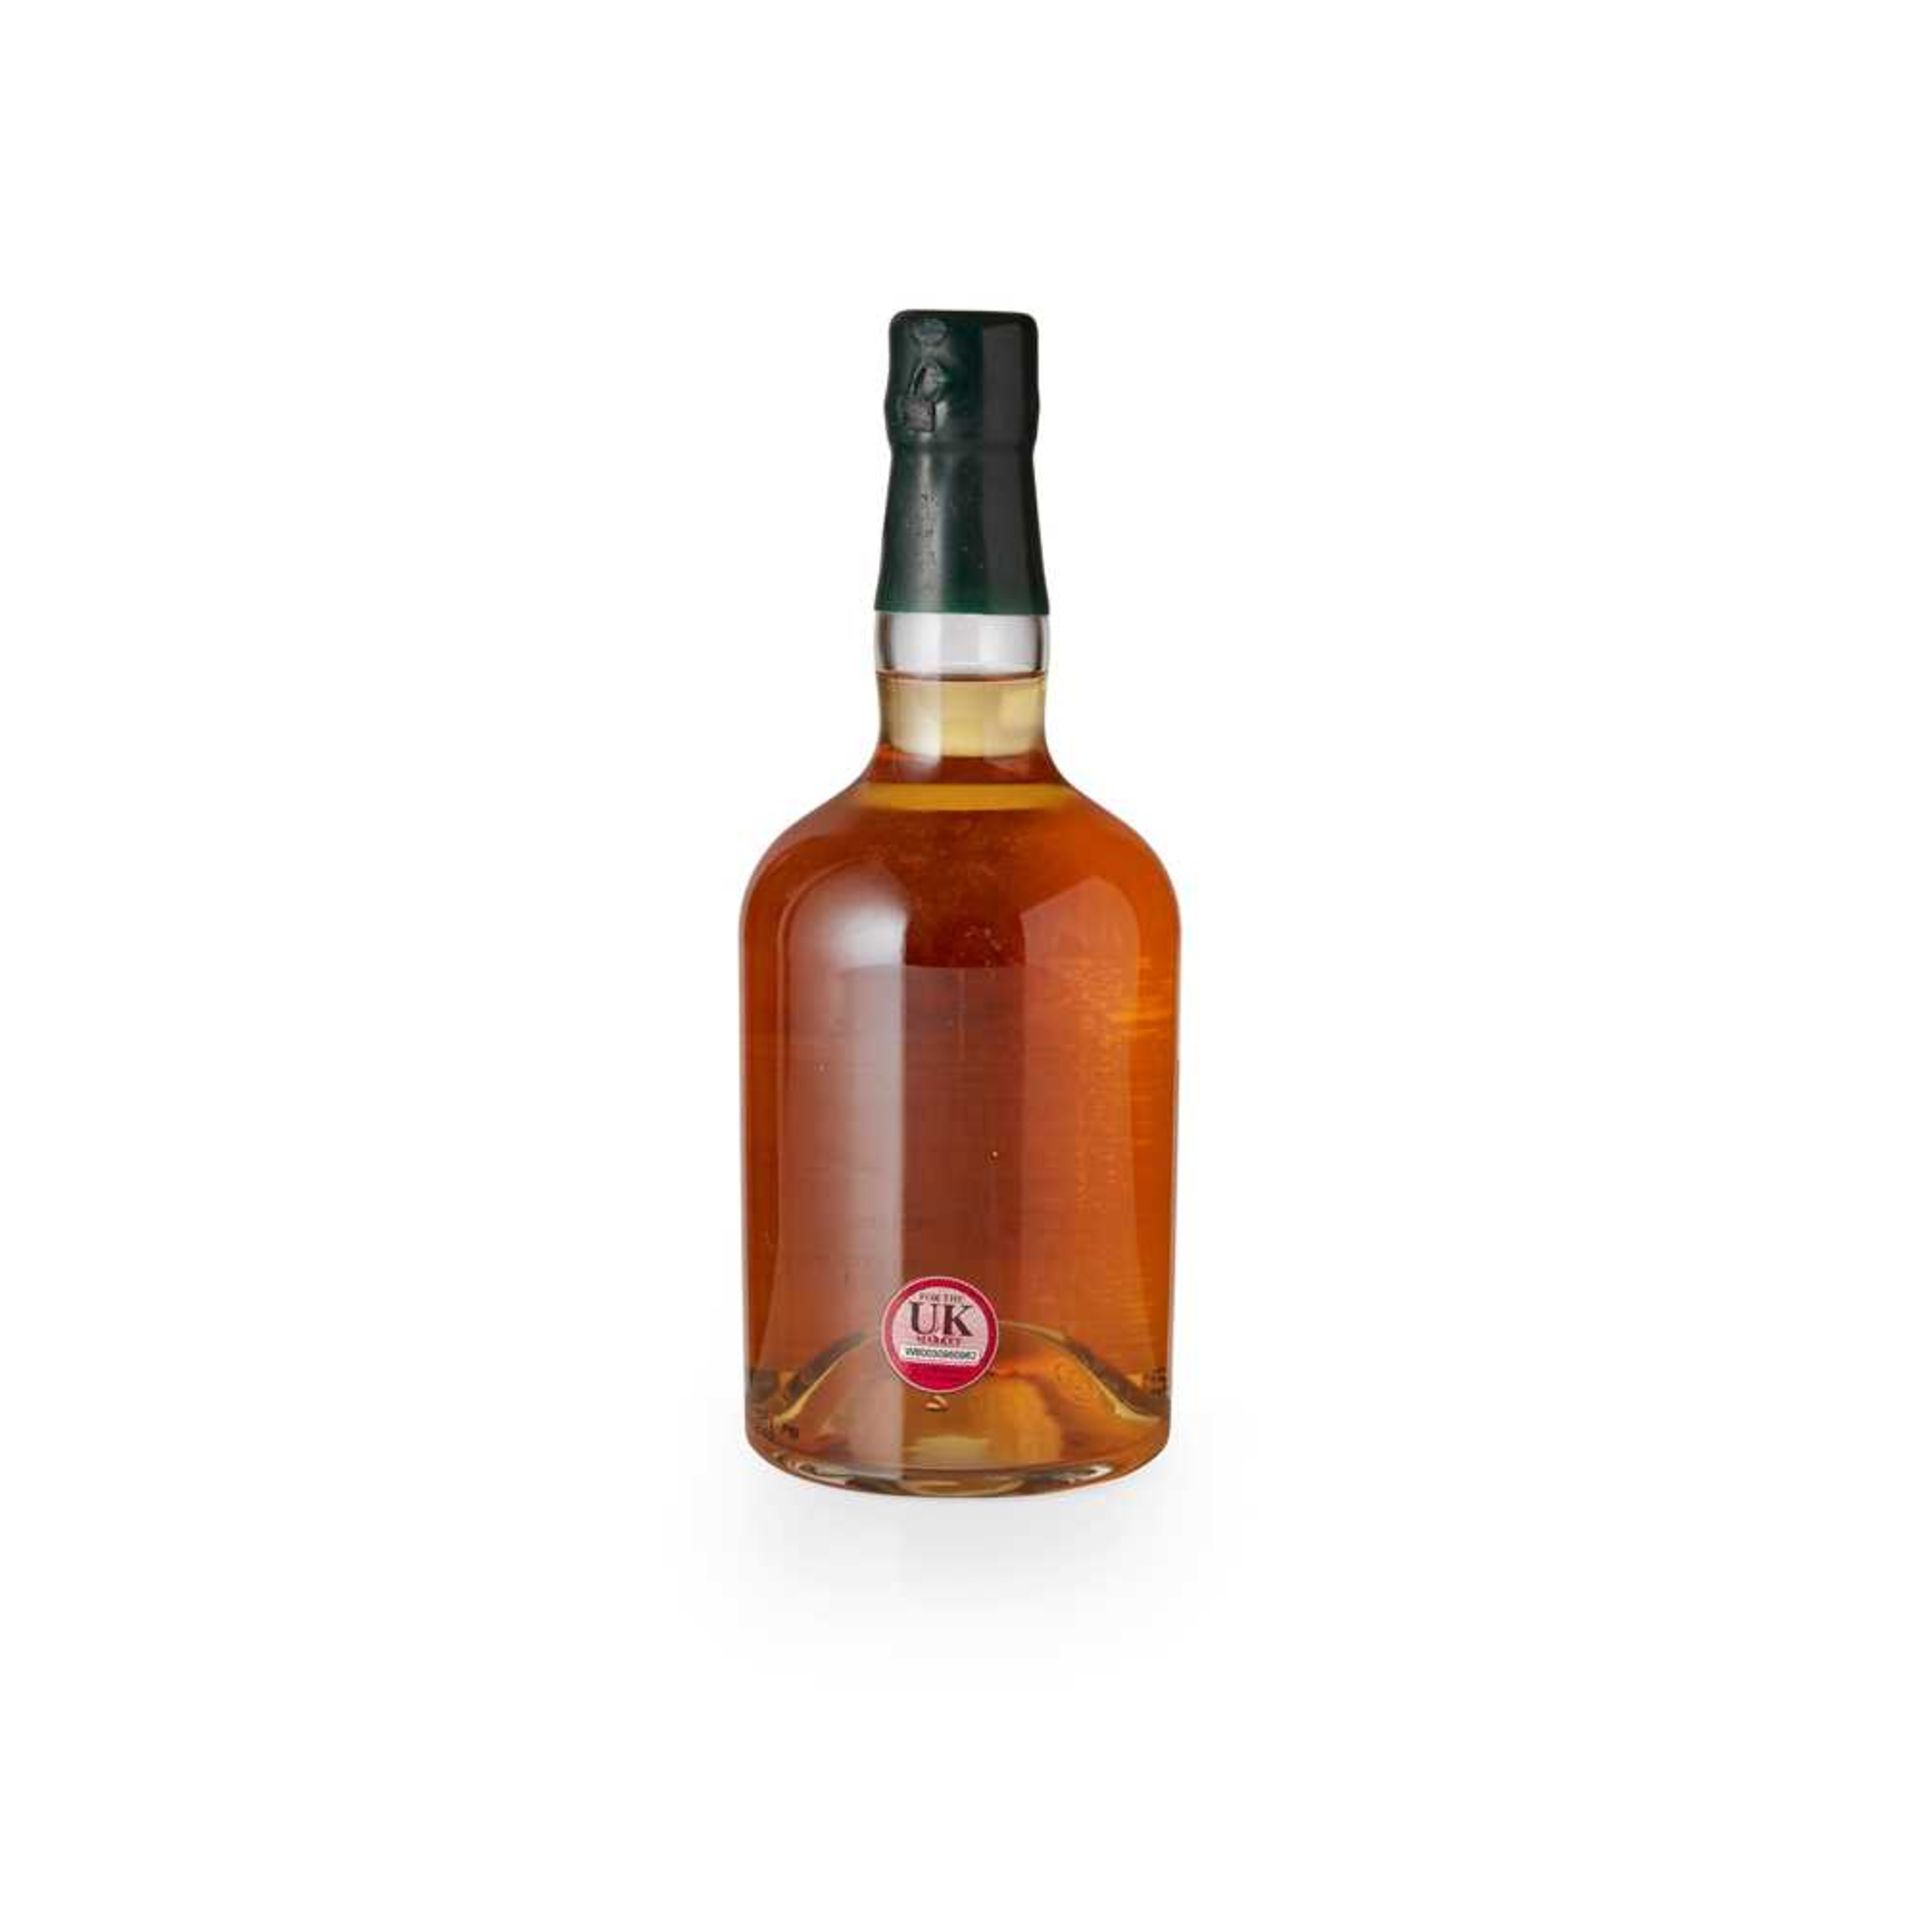 THE MACALLAN 1990 25 YEAR OLD - HUNTER LAING OLD & RARE - Image 3 of 3